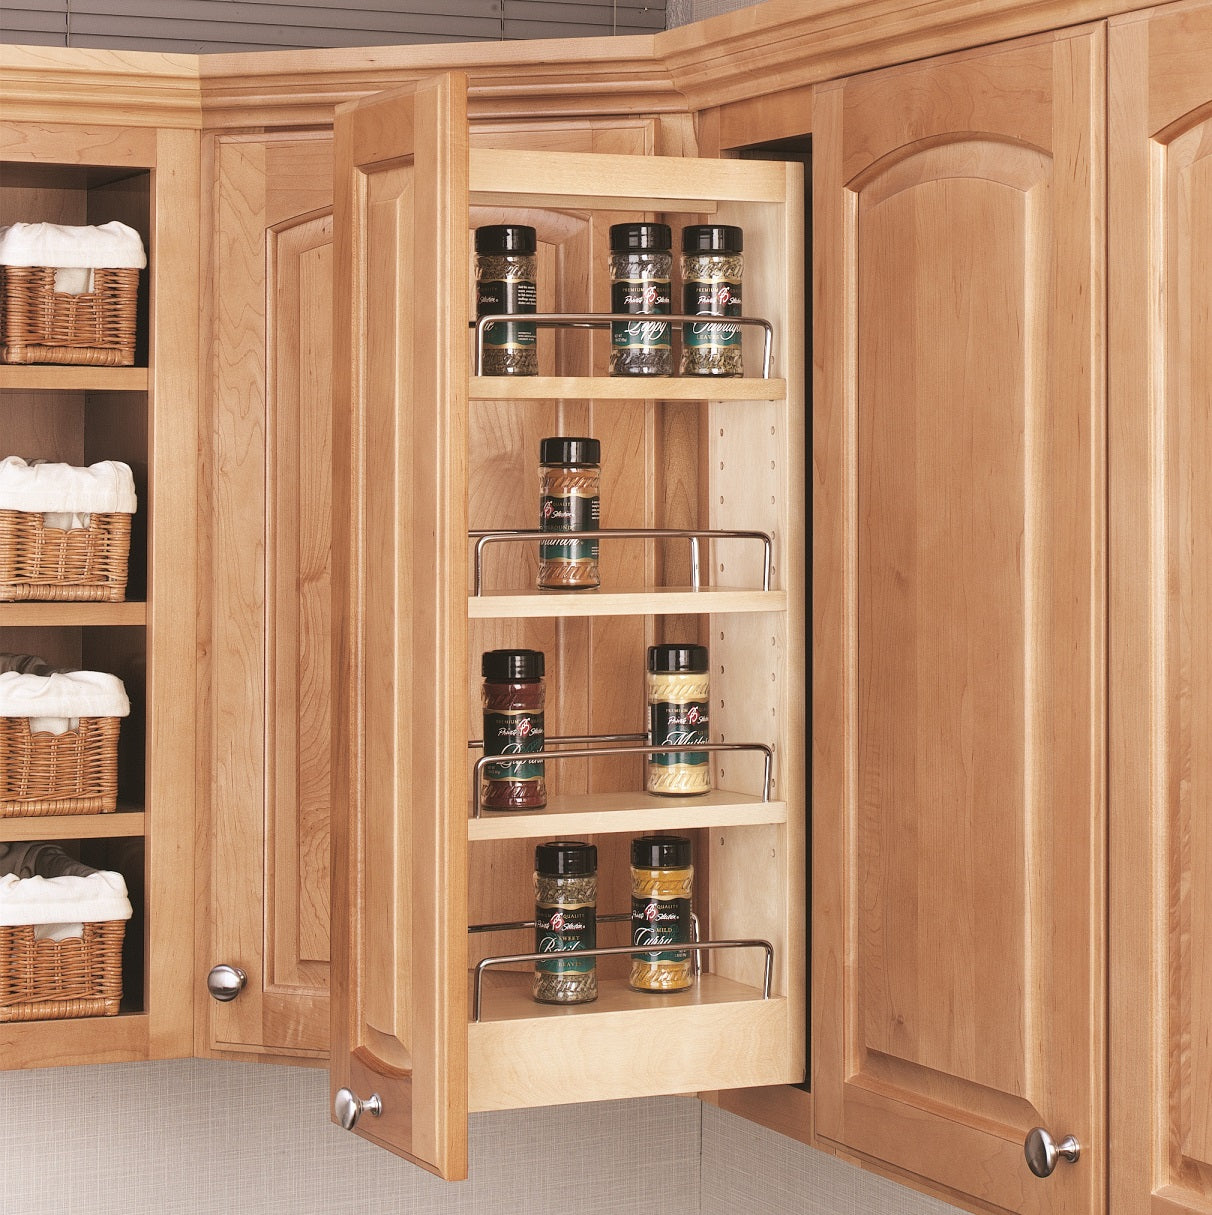 Rev-A-Shelf 448-Wc-5C Pull-Out Wood Wall Cabinet Organizer, Natural